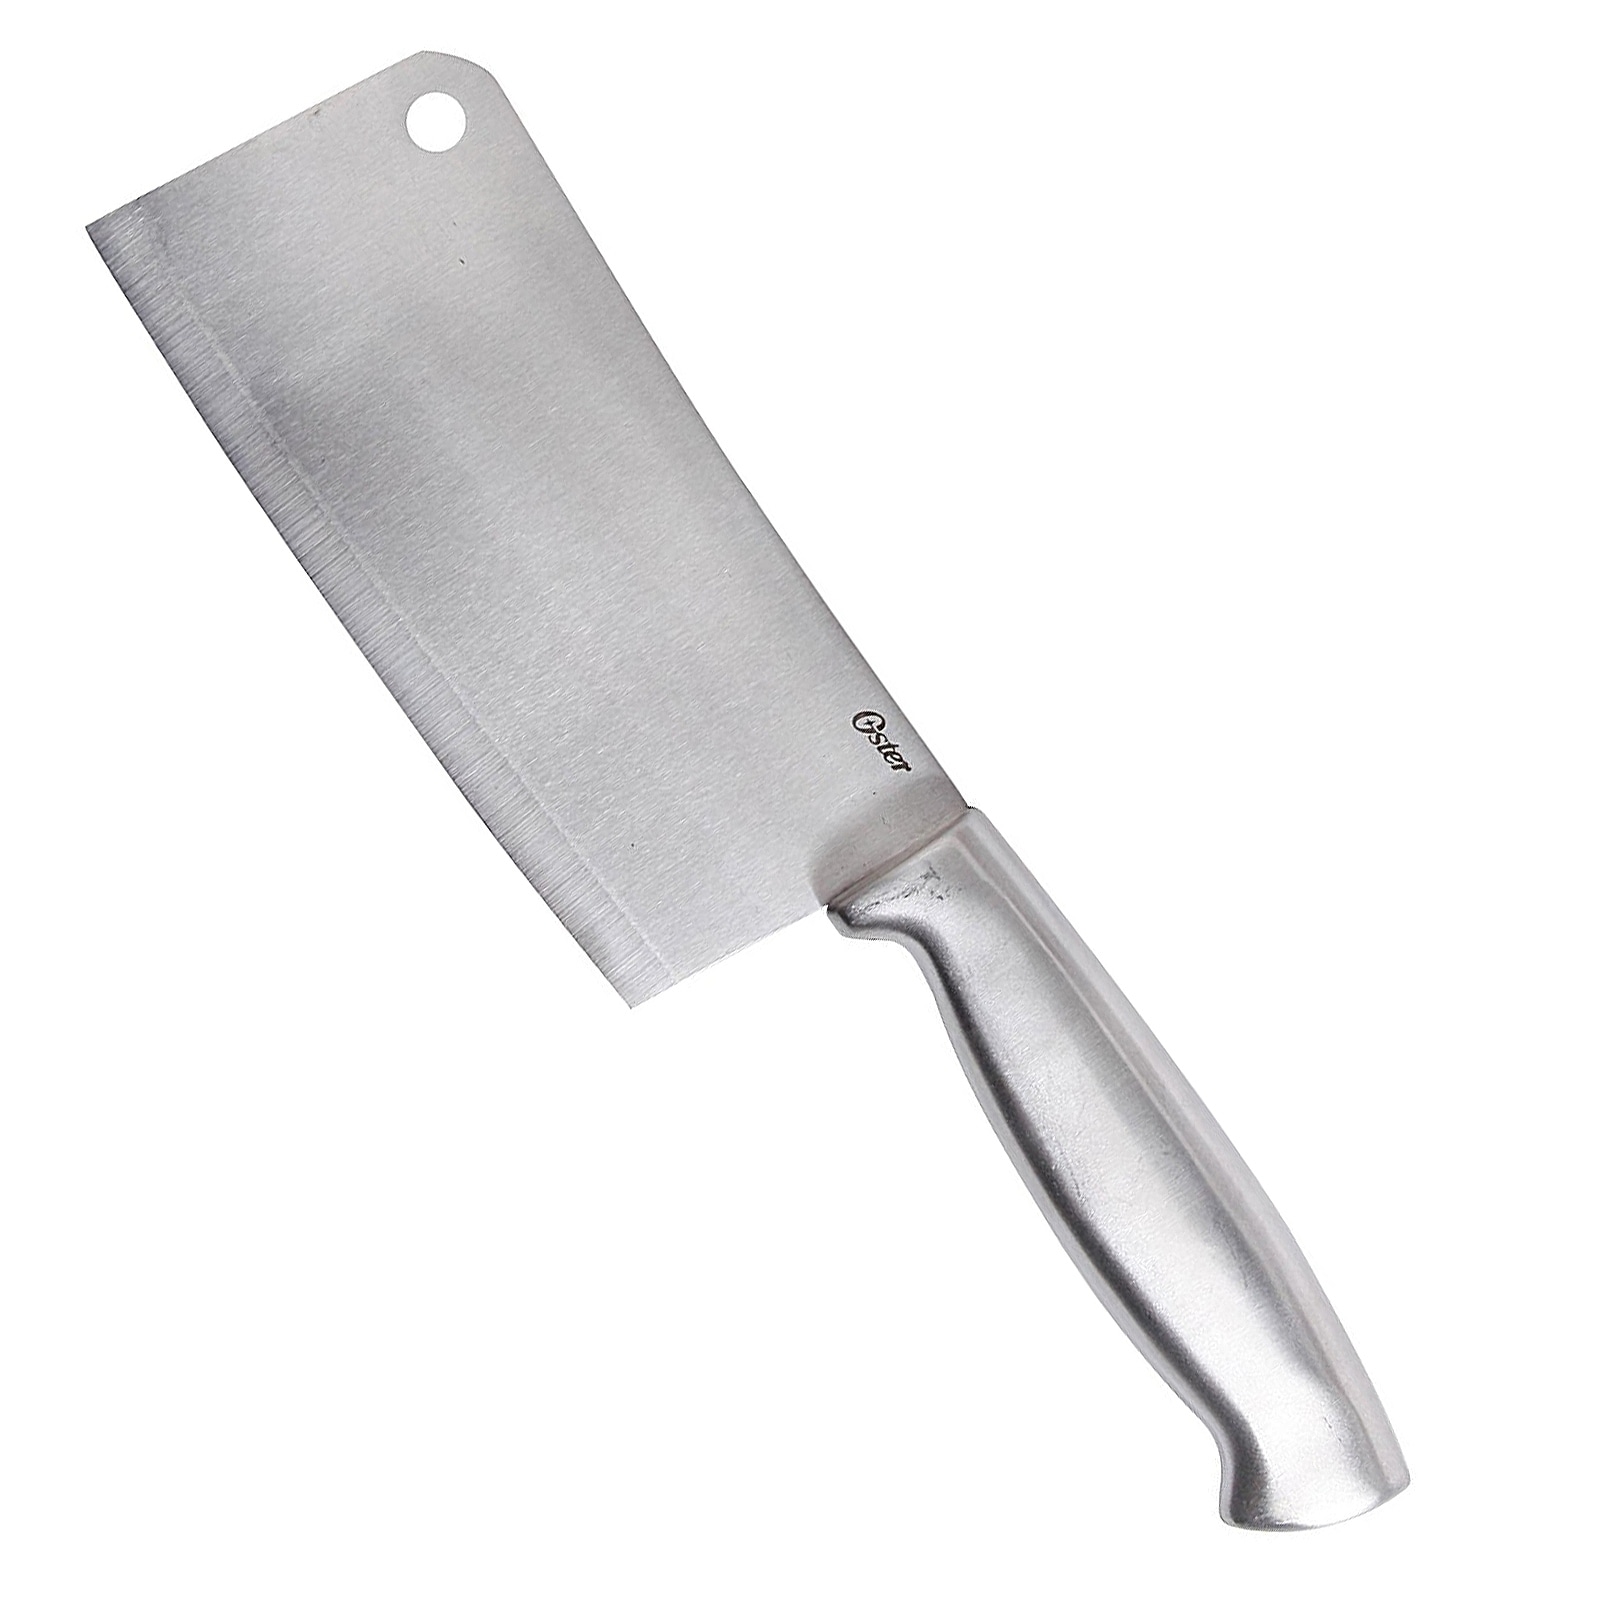 https://ak1.ostkcdn.com/images/products/is/images/direct/a2864394efe5dfaa6a43b98c6ca98e9623c37847/Oster-Baldwyn-6.25-Inch-Stainless-Steel-Cleaver-Knife.jpg